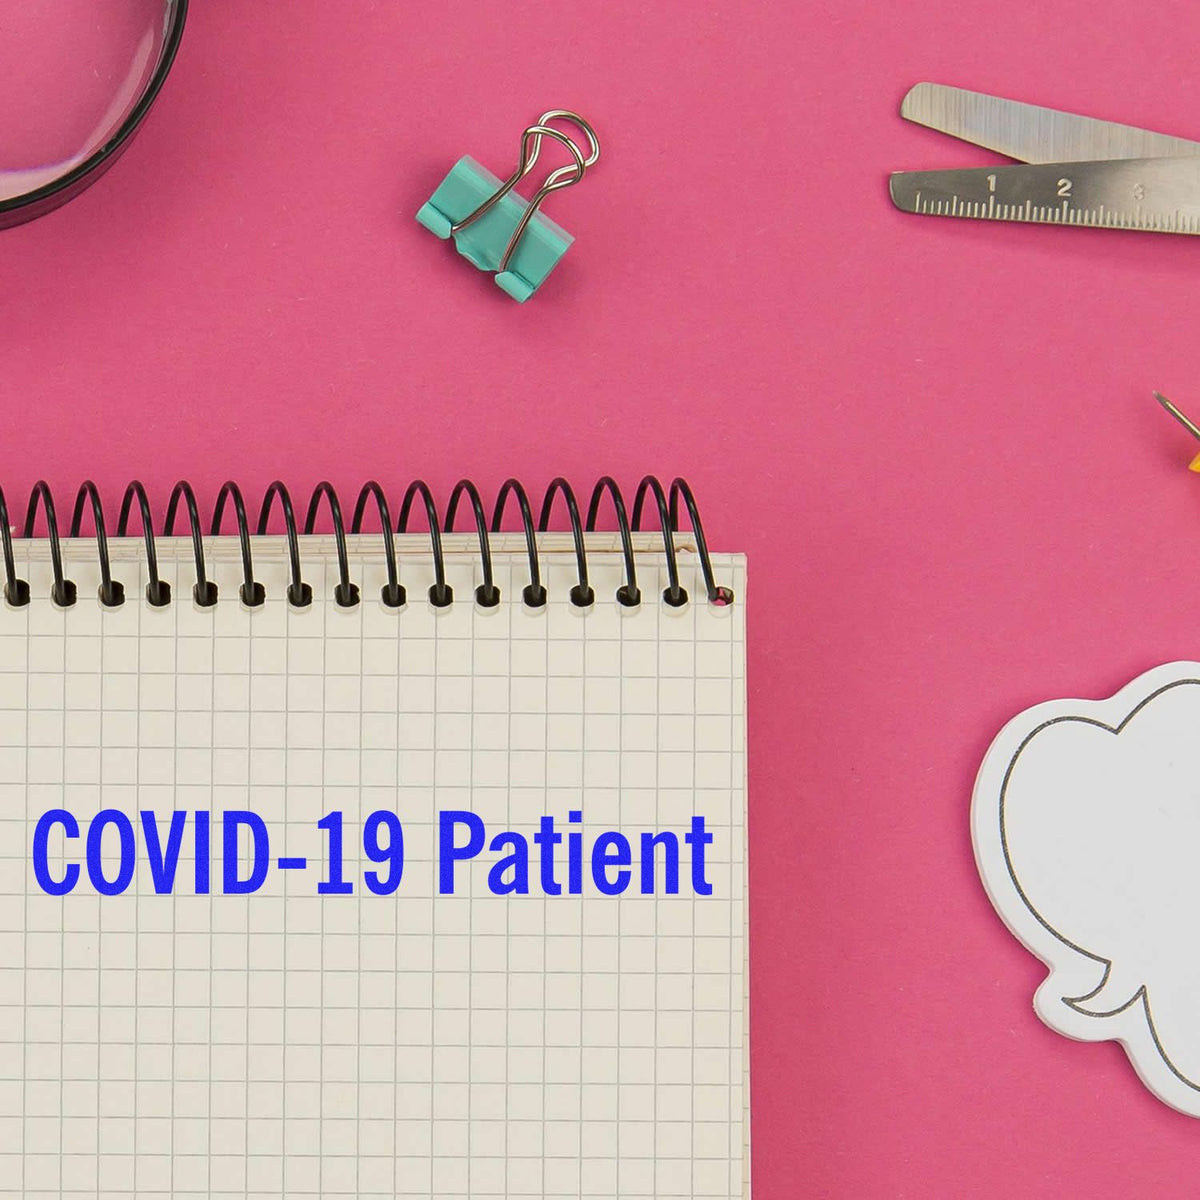 Slim Pre-Inked Covid-19 Patient Stamp In Use Photo